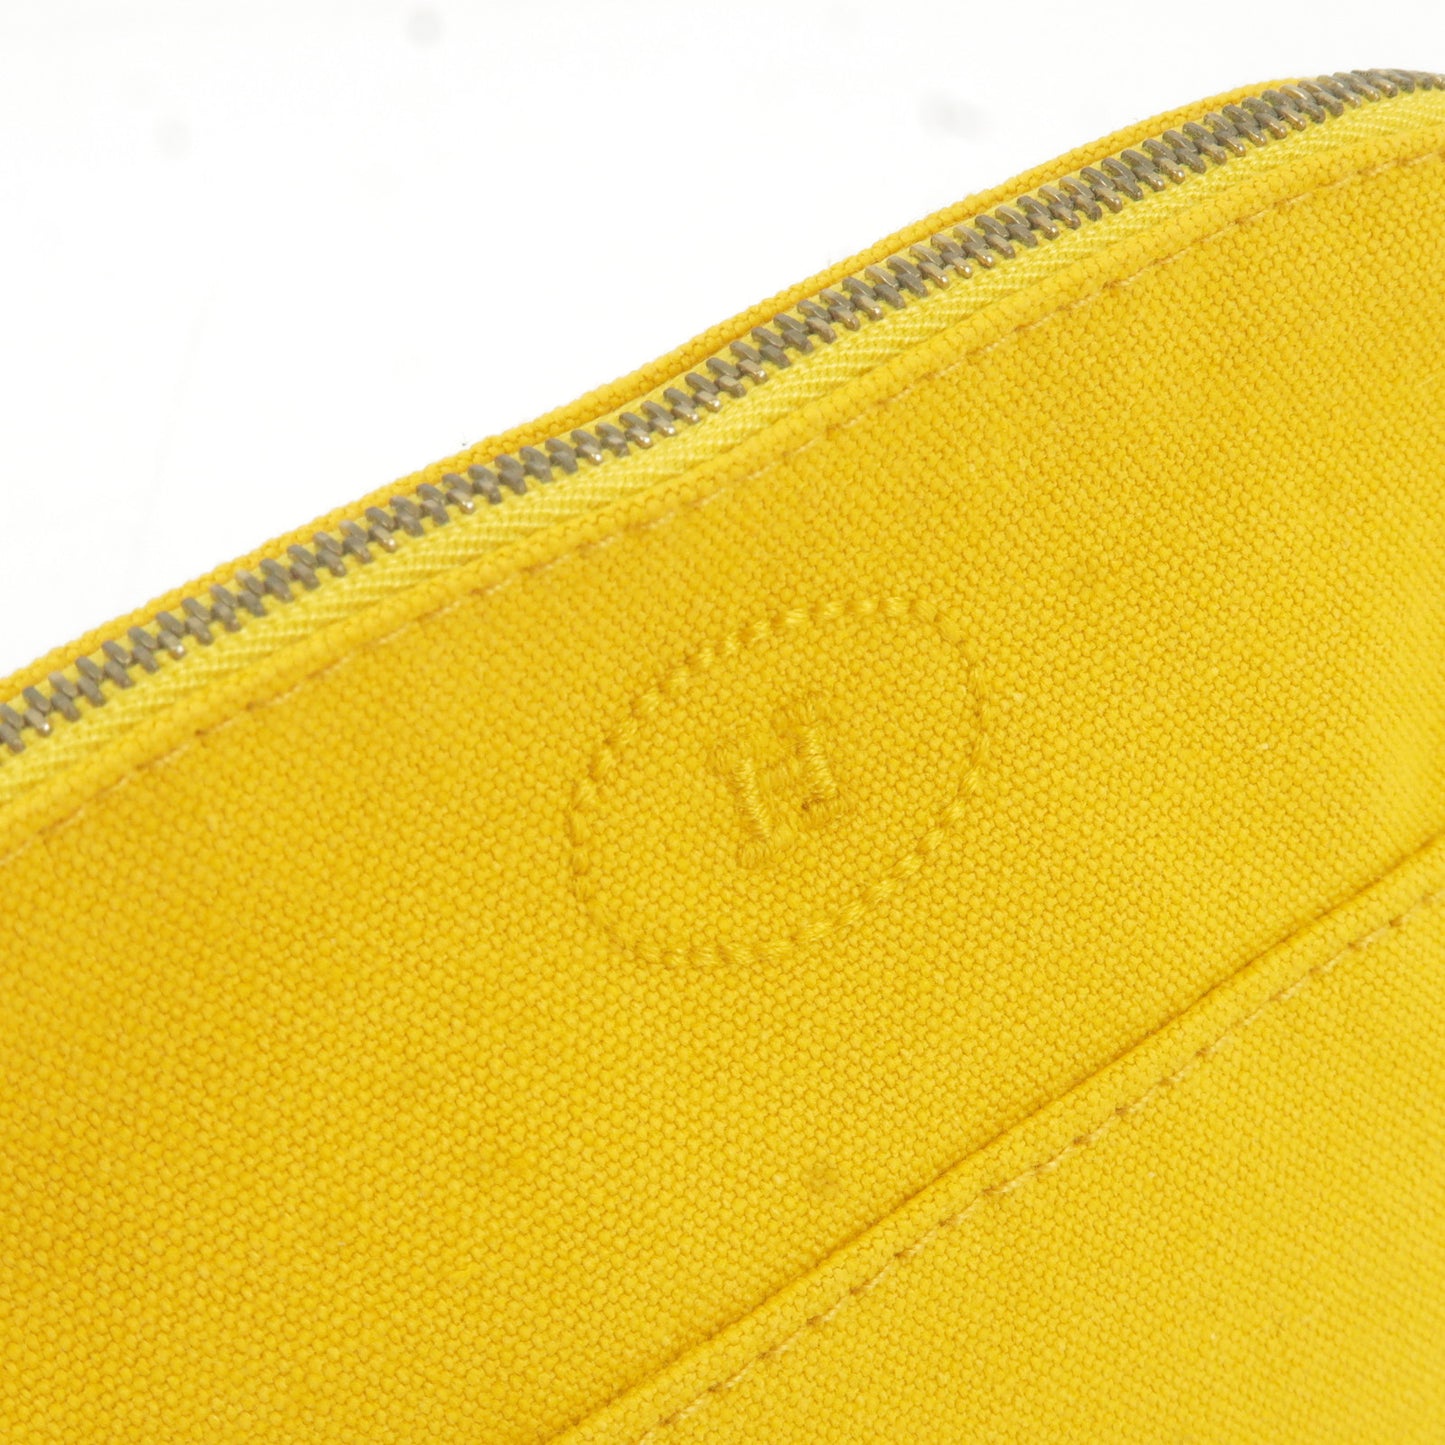 HERMES Canvas Leather Bolide Mini Pouch Cosmetics Bag Yellow